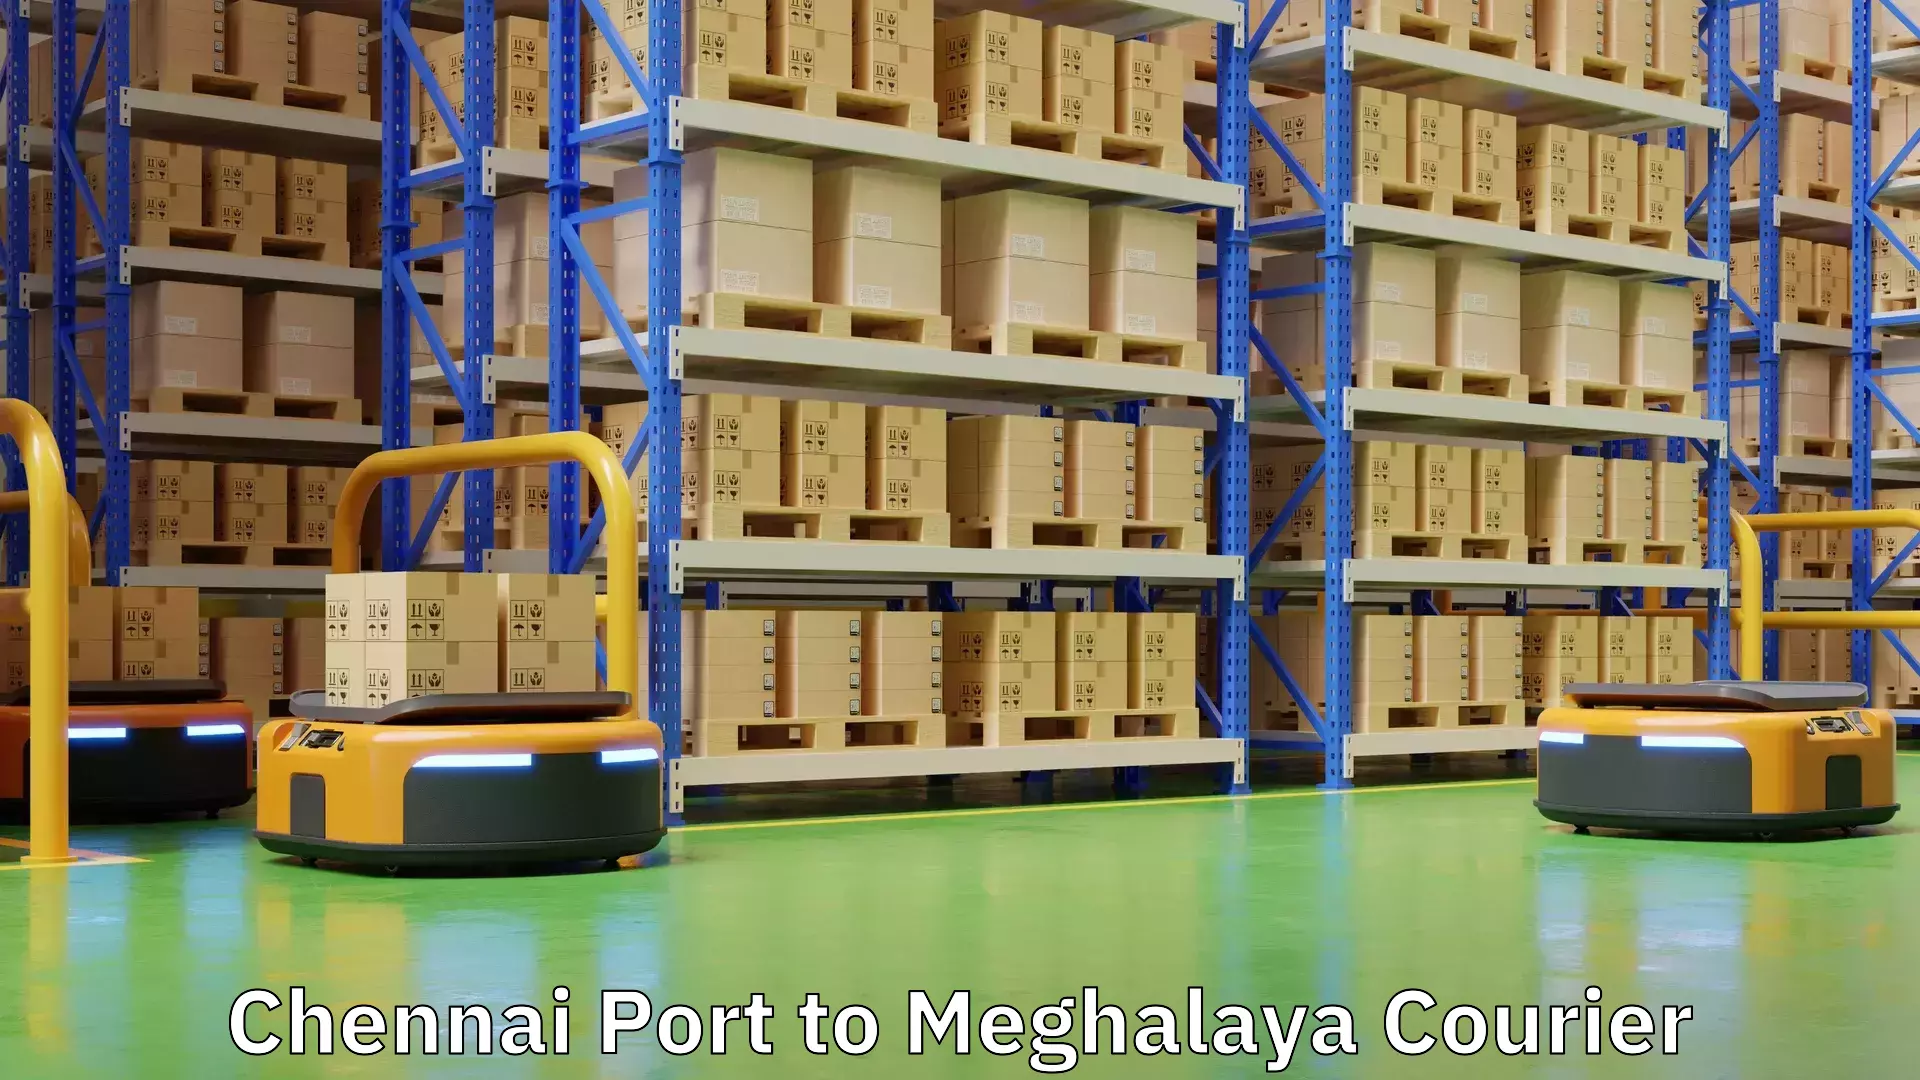 Customer-oriented courier services Chennai Port to Meghalaya